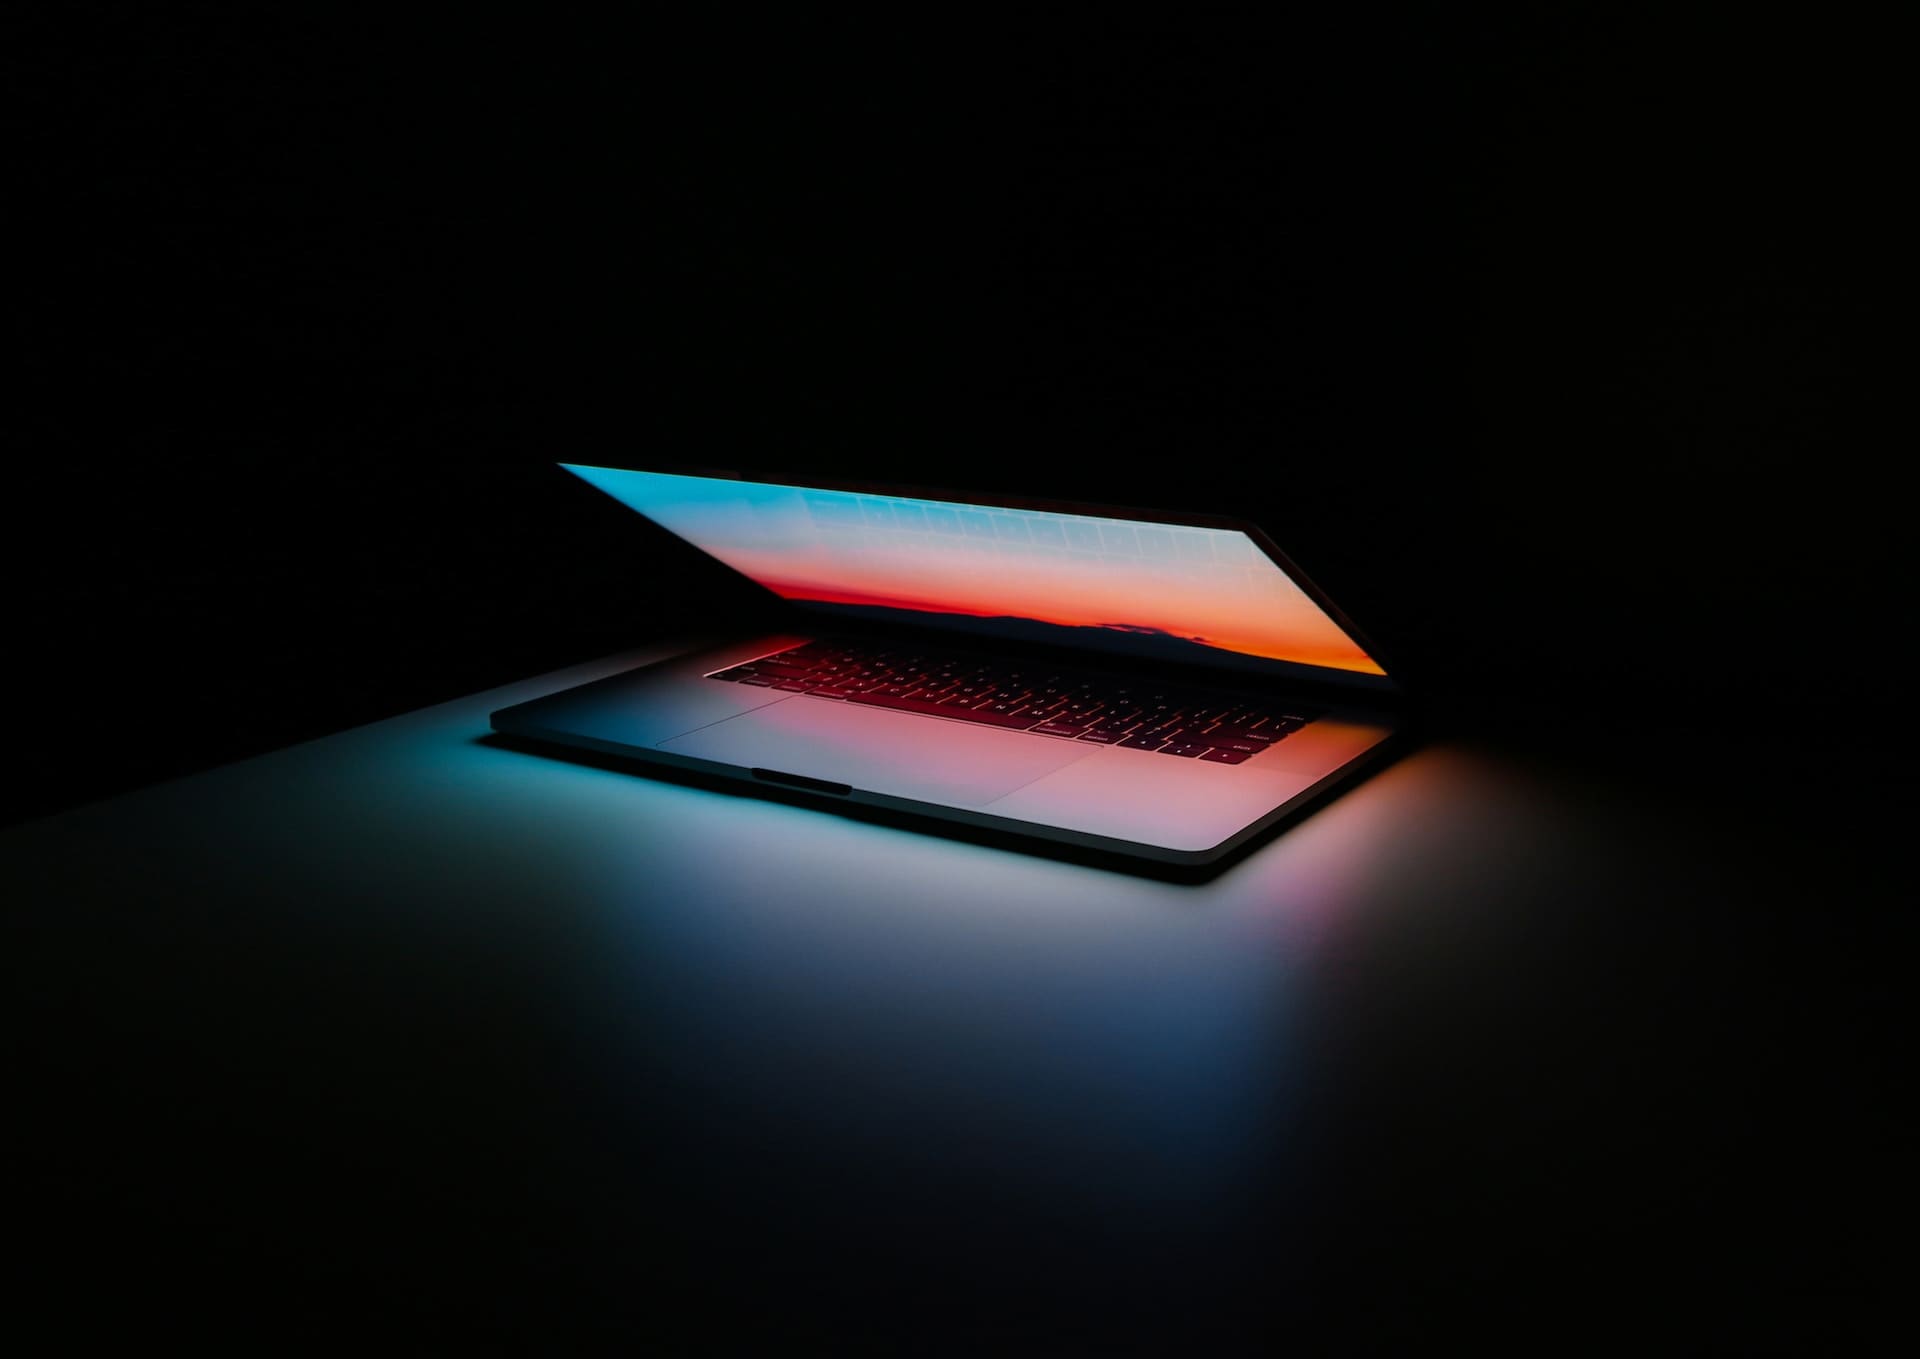 picture of a partially opened laptop in a darkbox studio environment, the laptop screen is illuminating the centre of the screen with blue and orange hues.